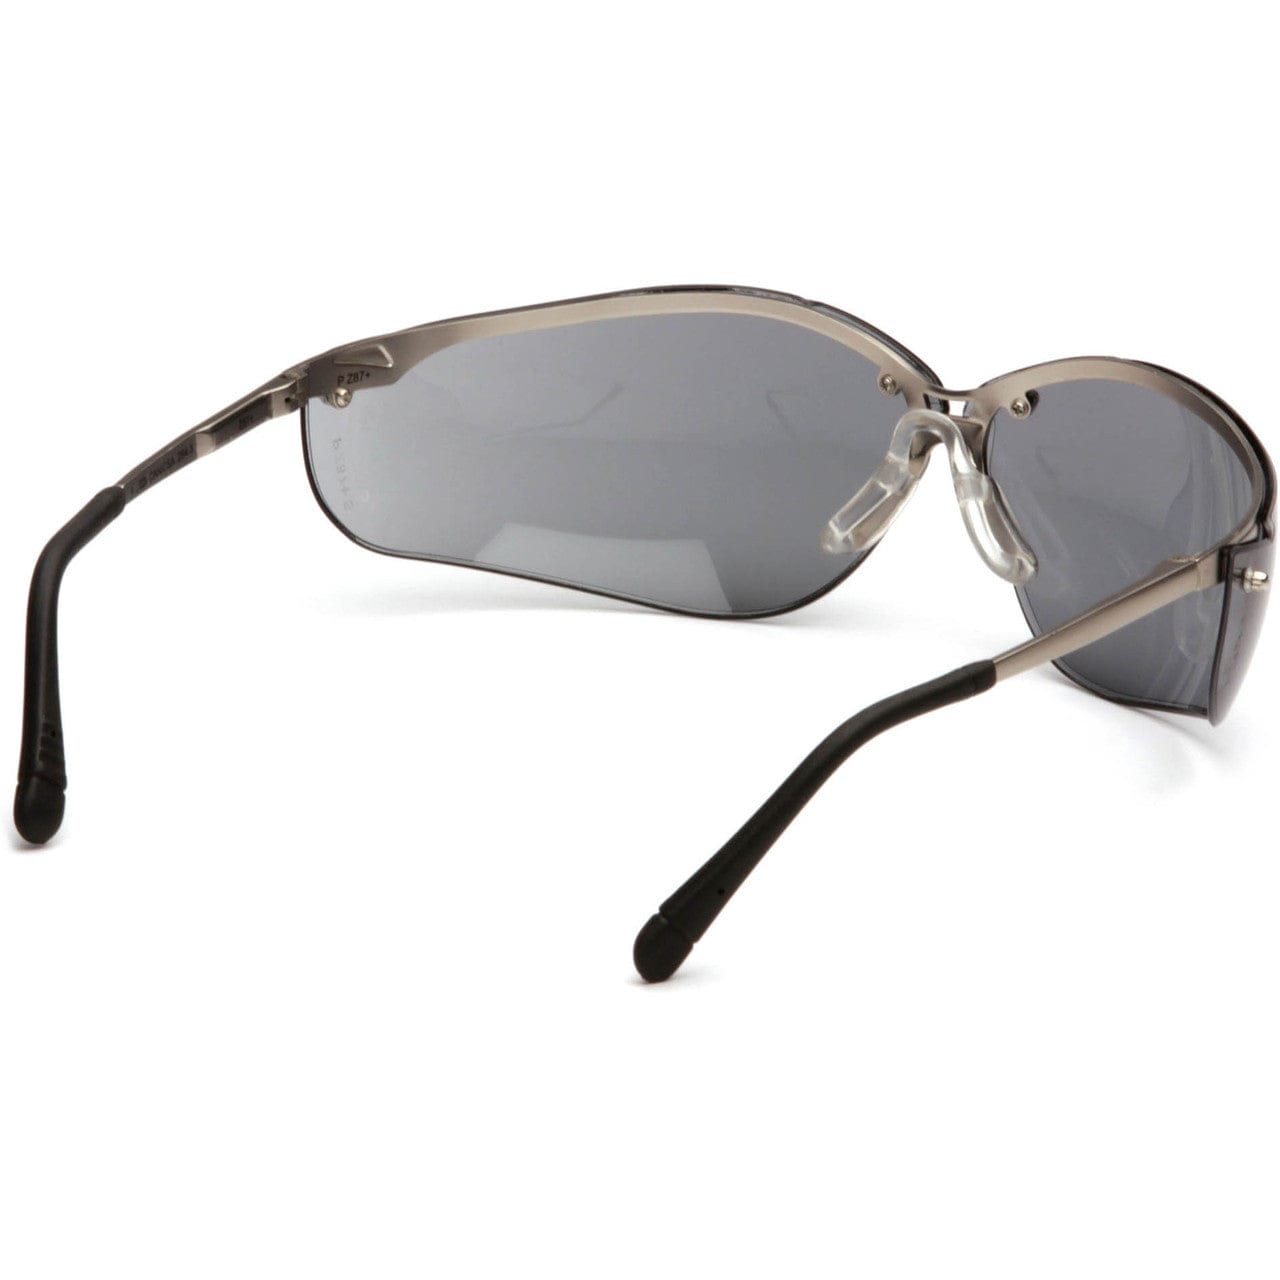 Pyramex V2 Metal Safety Glasses with Gray Lens SGM1820S Back